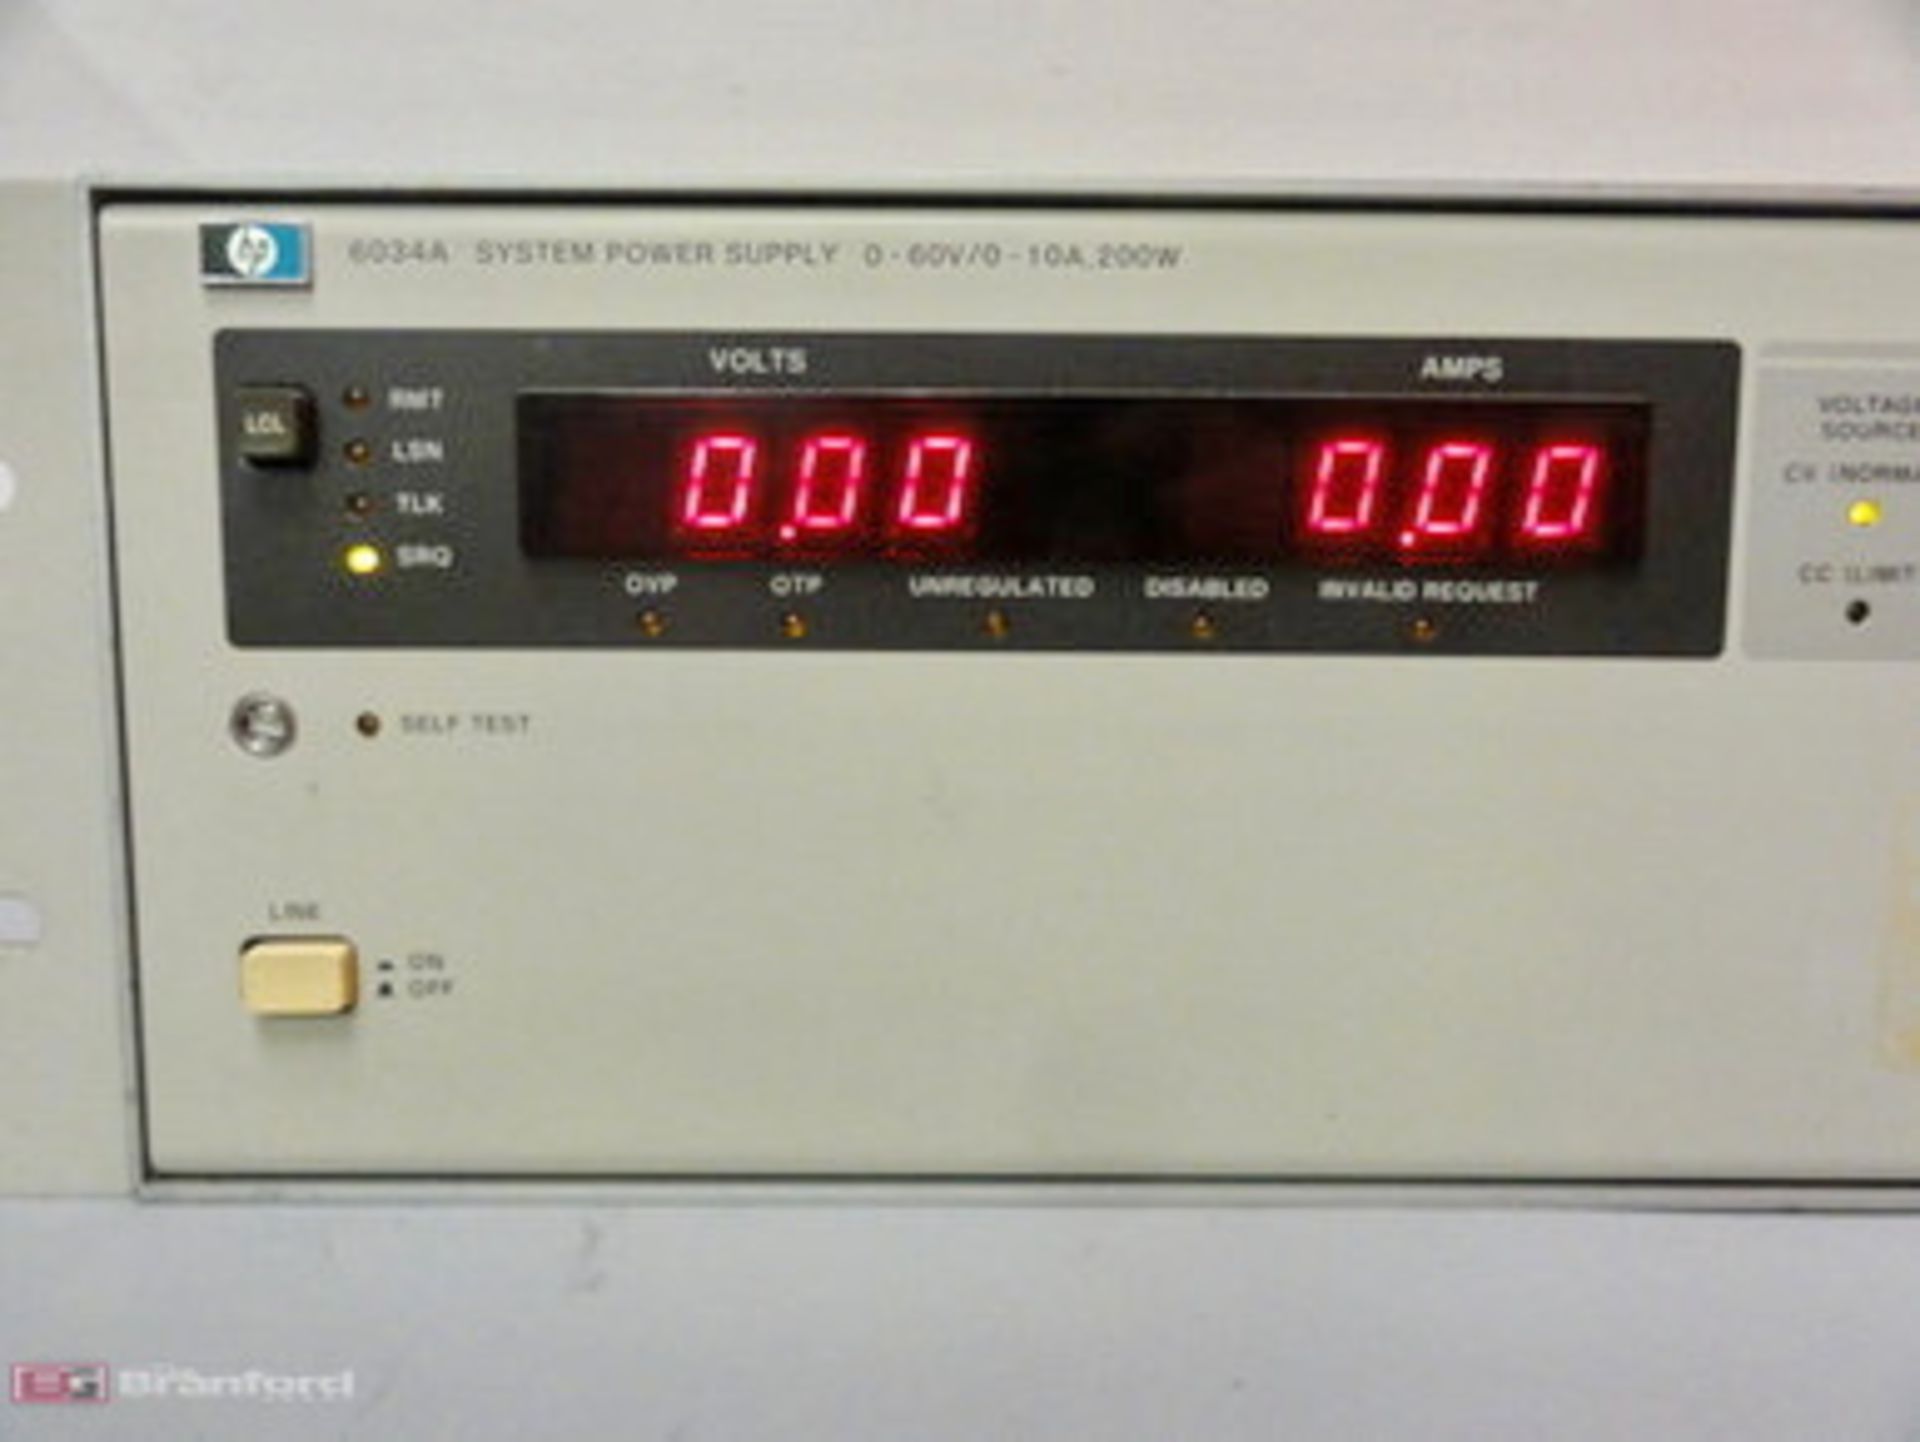 HP 6034A system power supply - Image 2 of 4